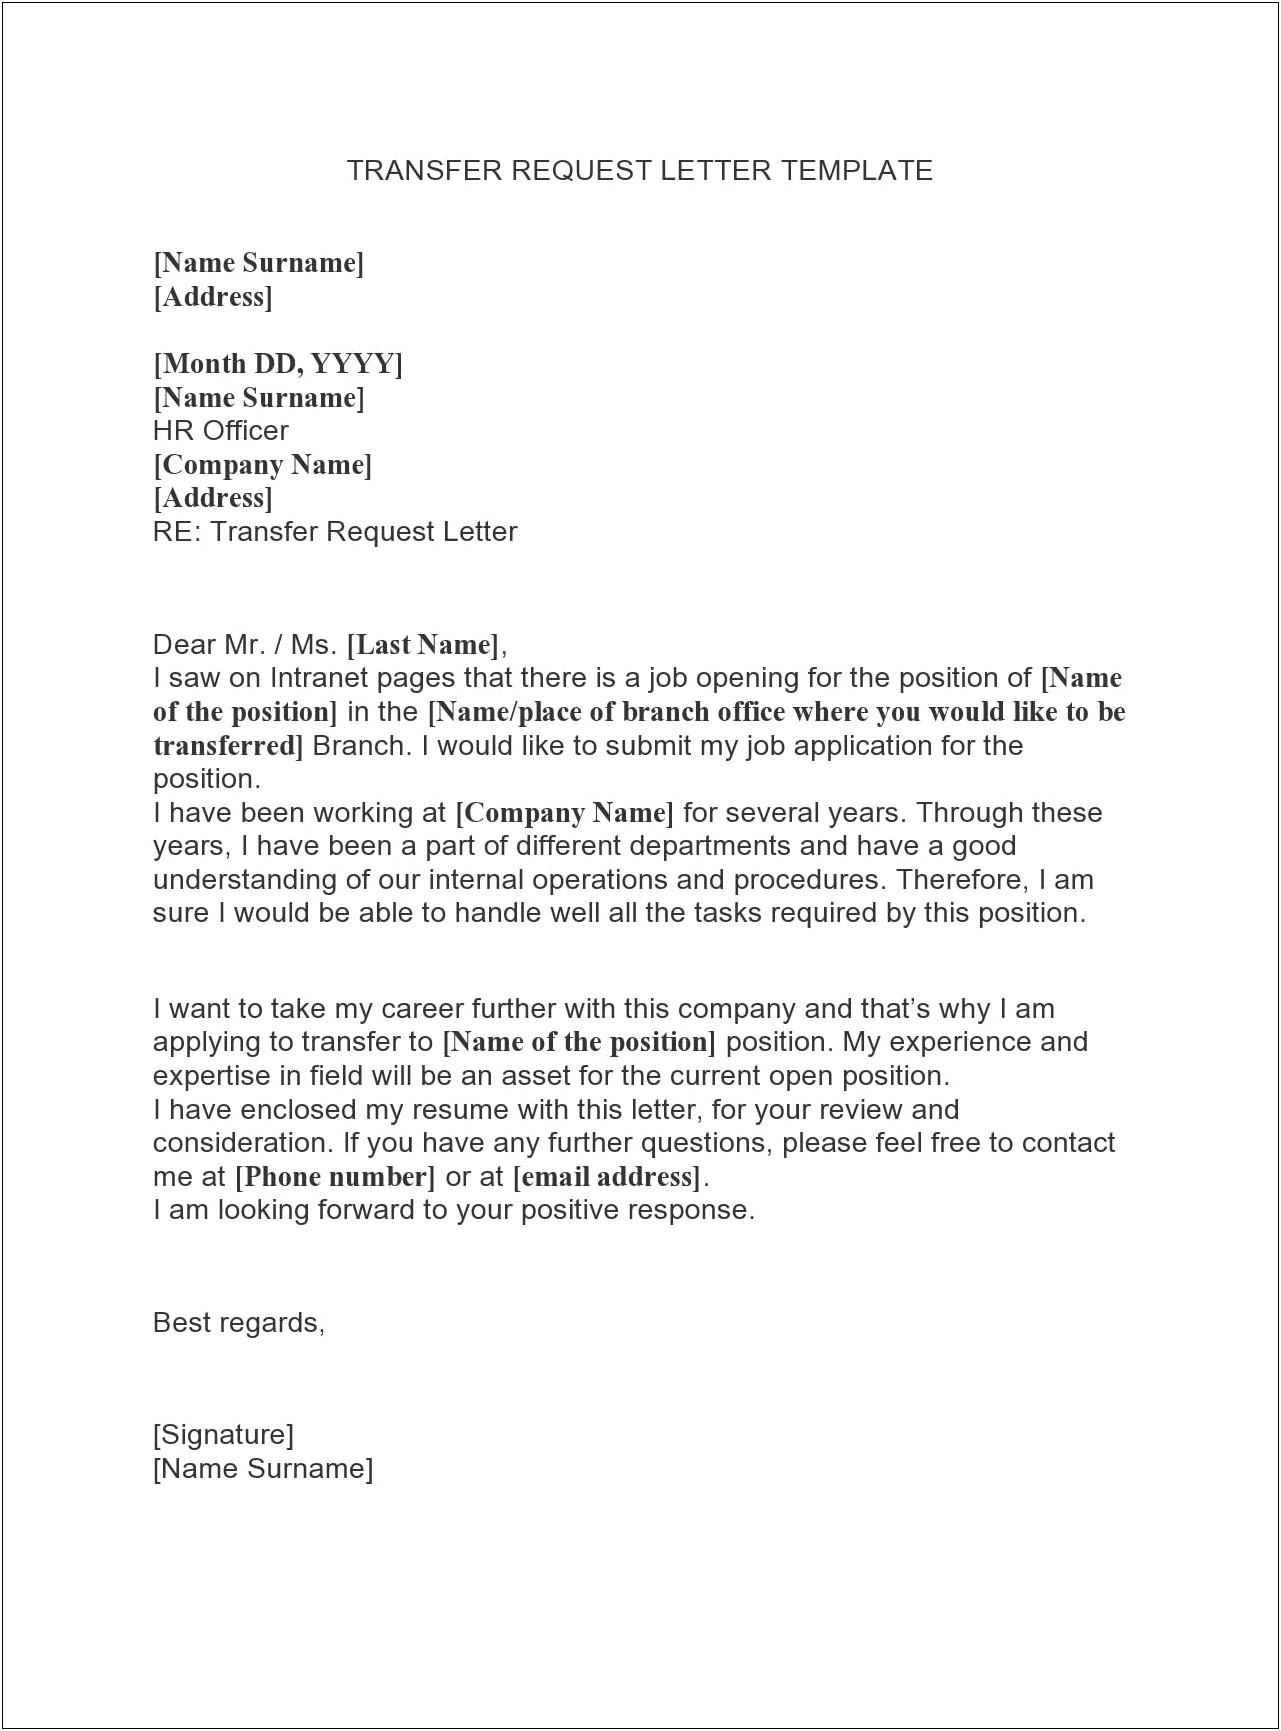 Transfer Request Letter Template Microsoft Word